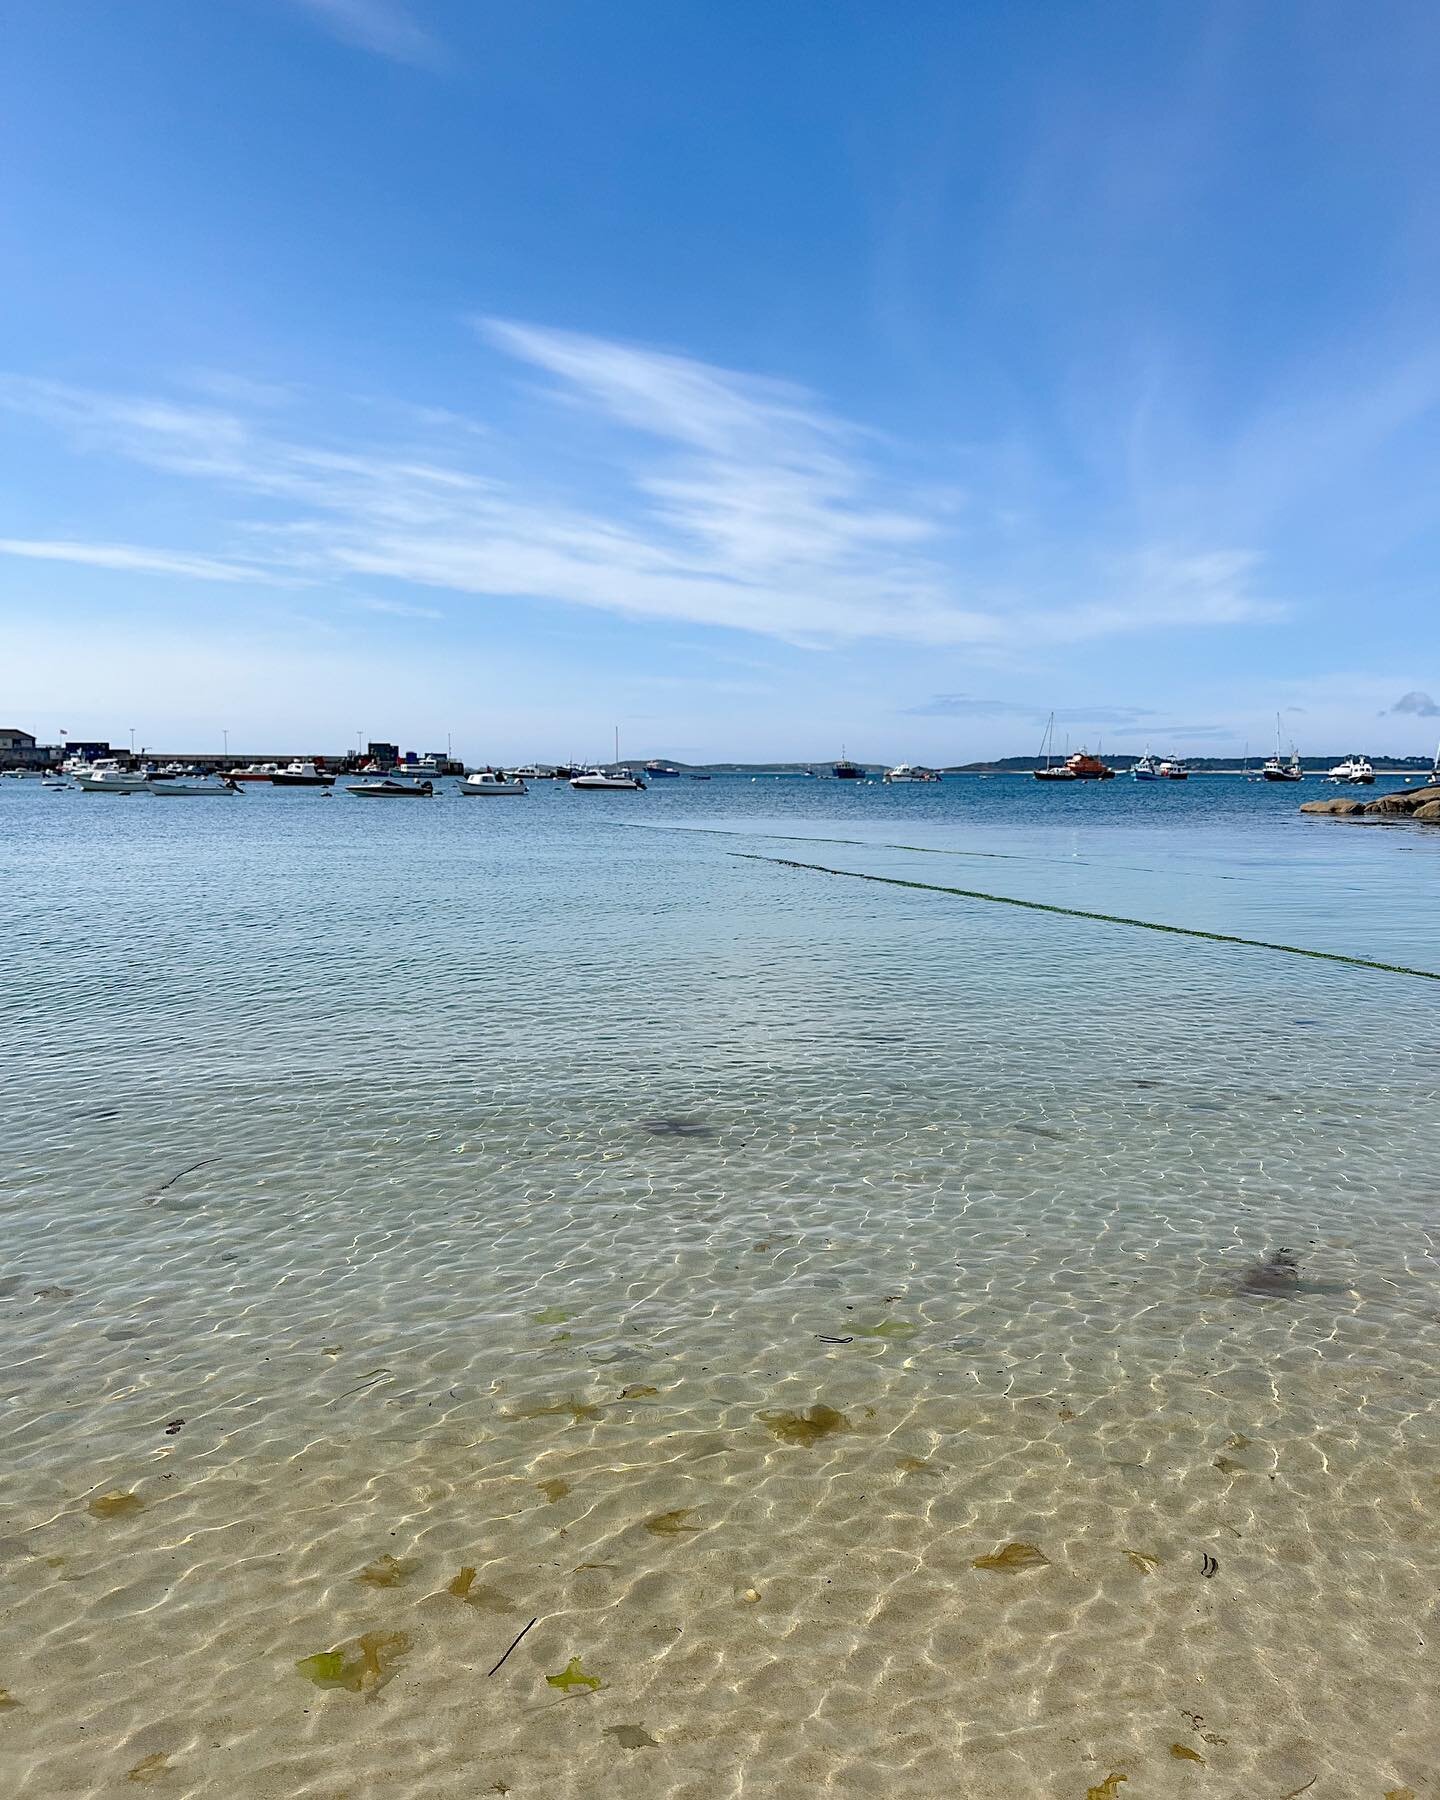 ISLAND life 🌊🏝️👌🏻

Soaking up the clearest waters and bluest skies at Town Beach on St Mary&rsquo;s, Isles of Scilly - the largest of the inhabited islands, 28 miles off the coast of Cornwall 👌🏻

Town beach is dog friendly all year round and a 